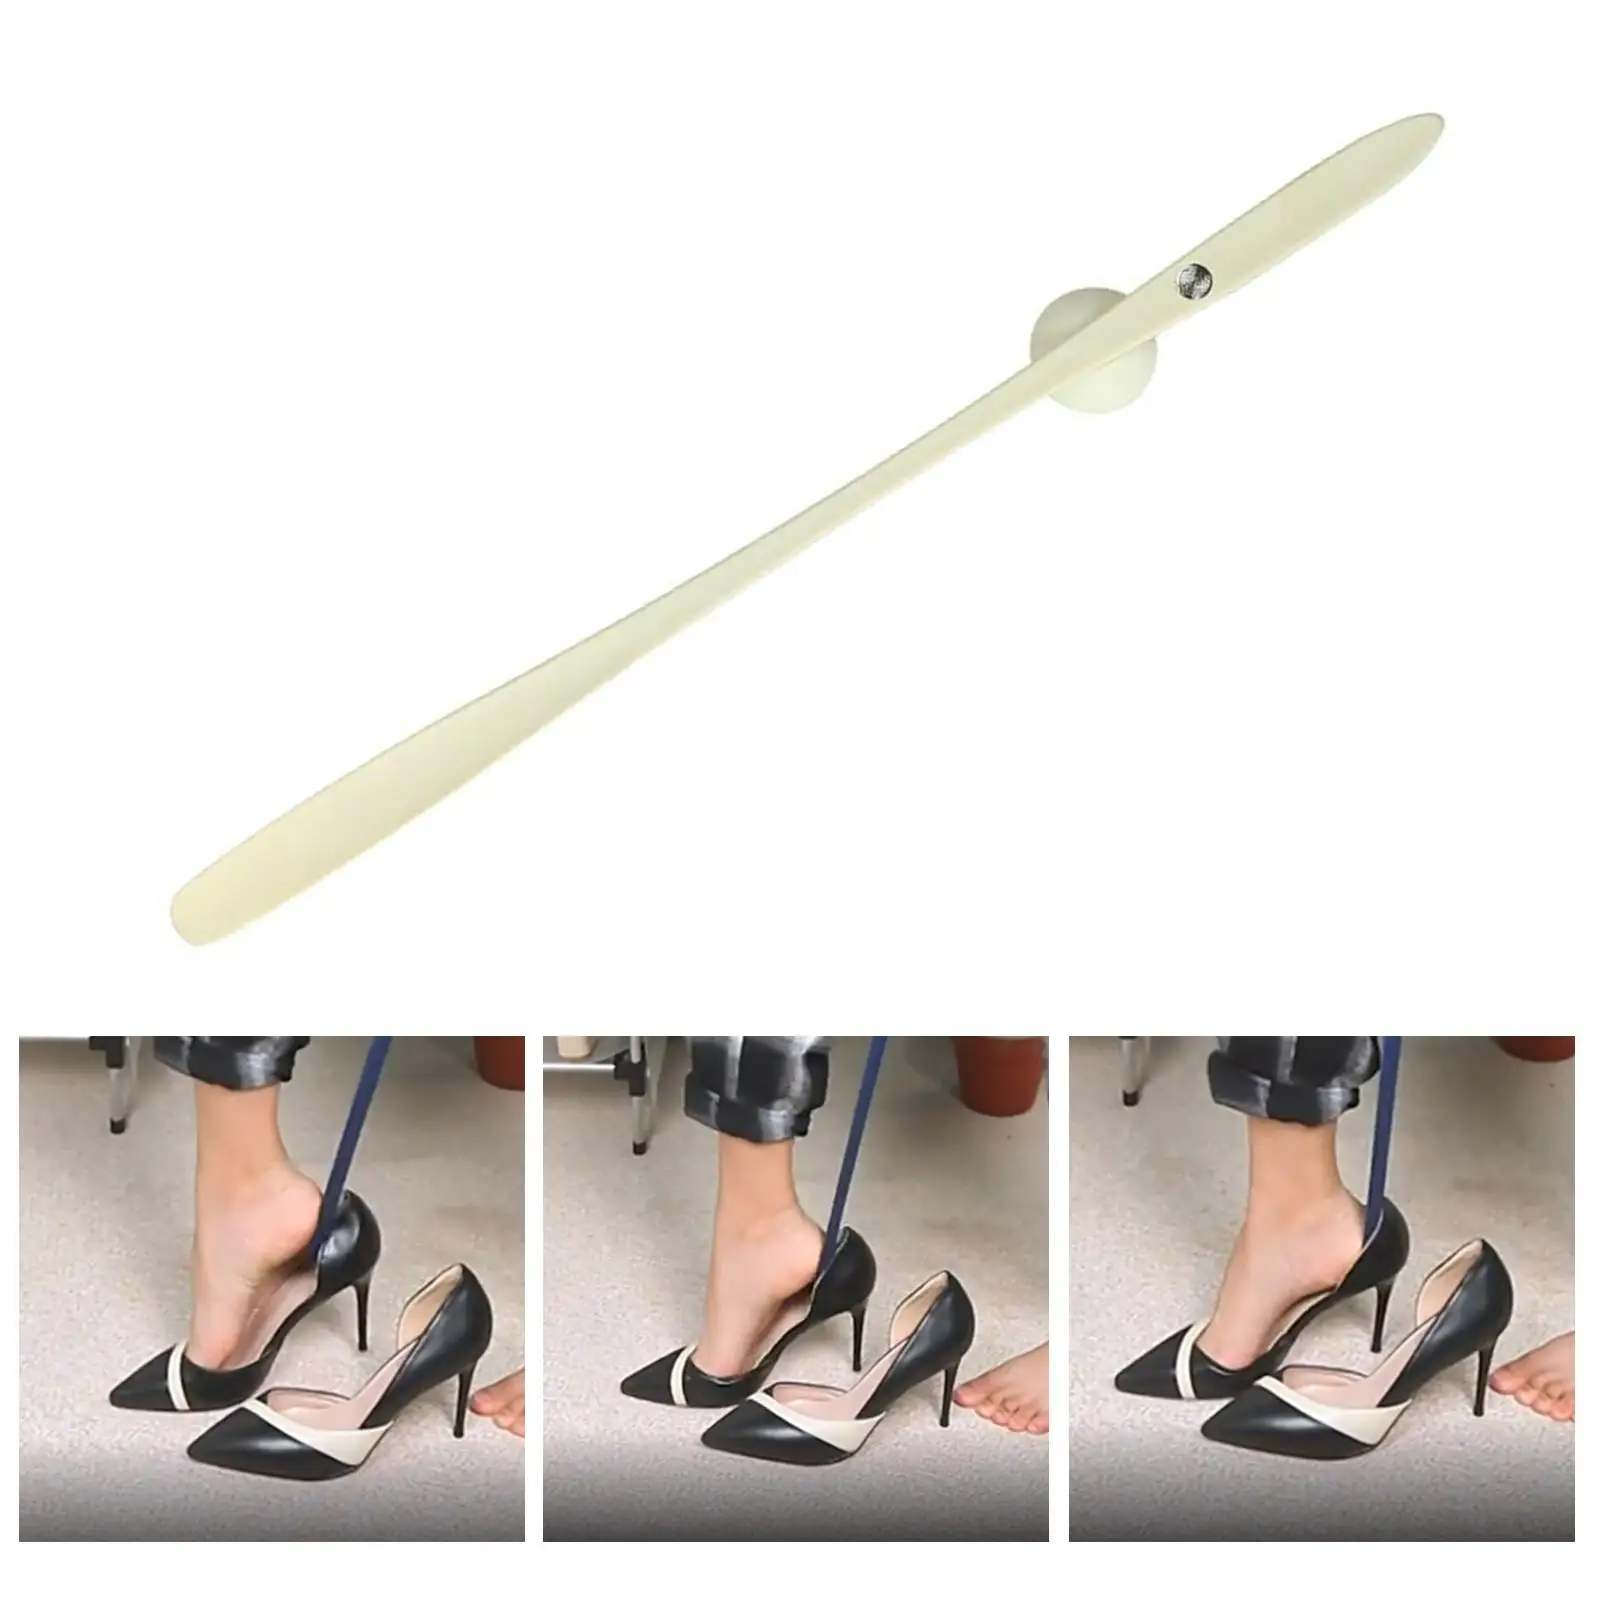 Portable Shoe Horn Dressing Aids Assist Tool Shoehorn Shoe Lifter for Kids Boots